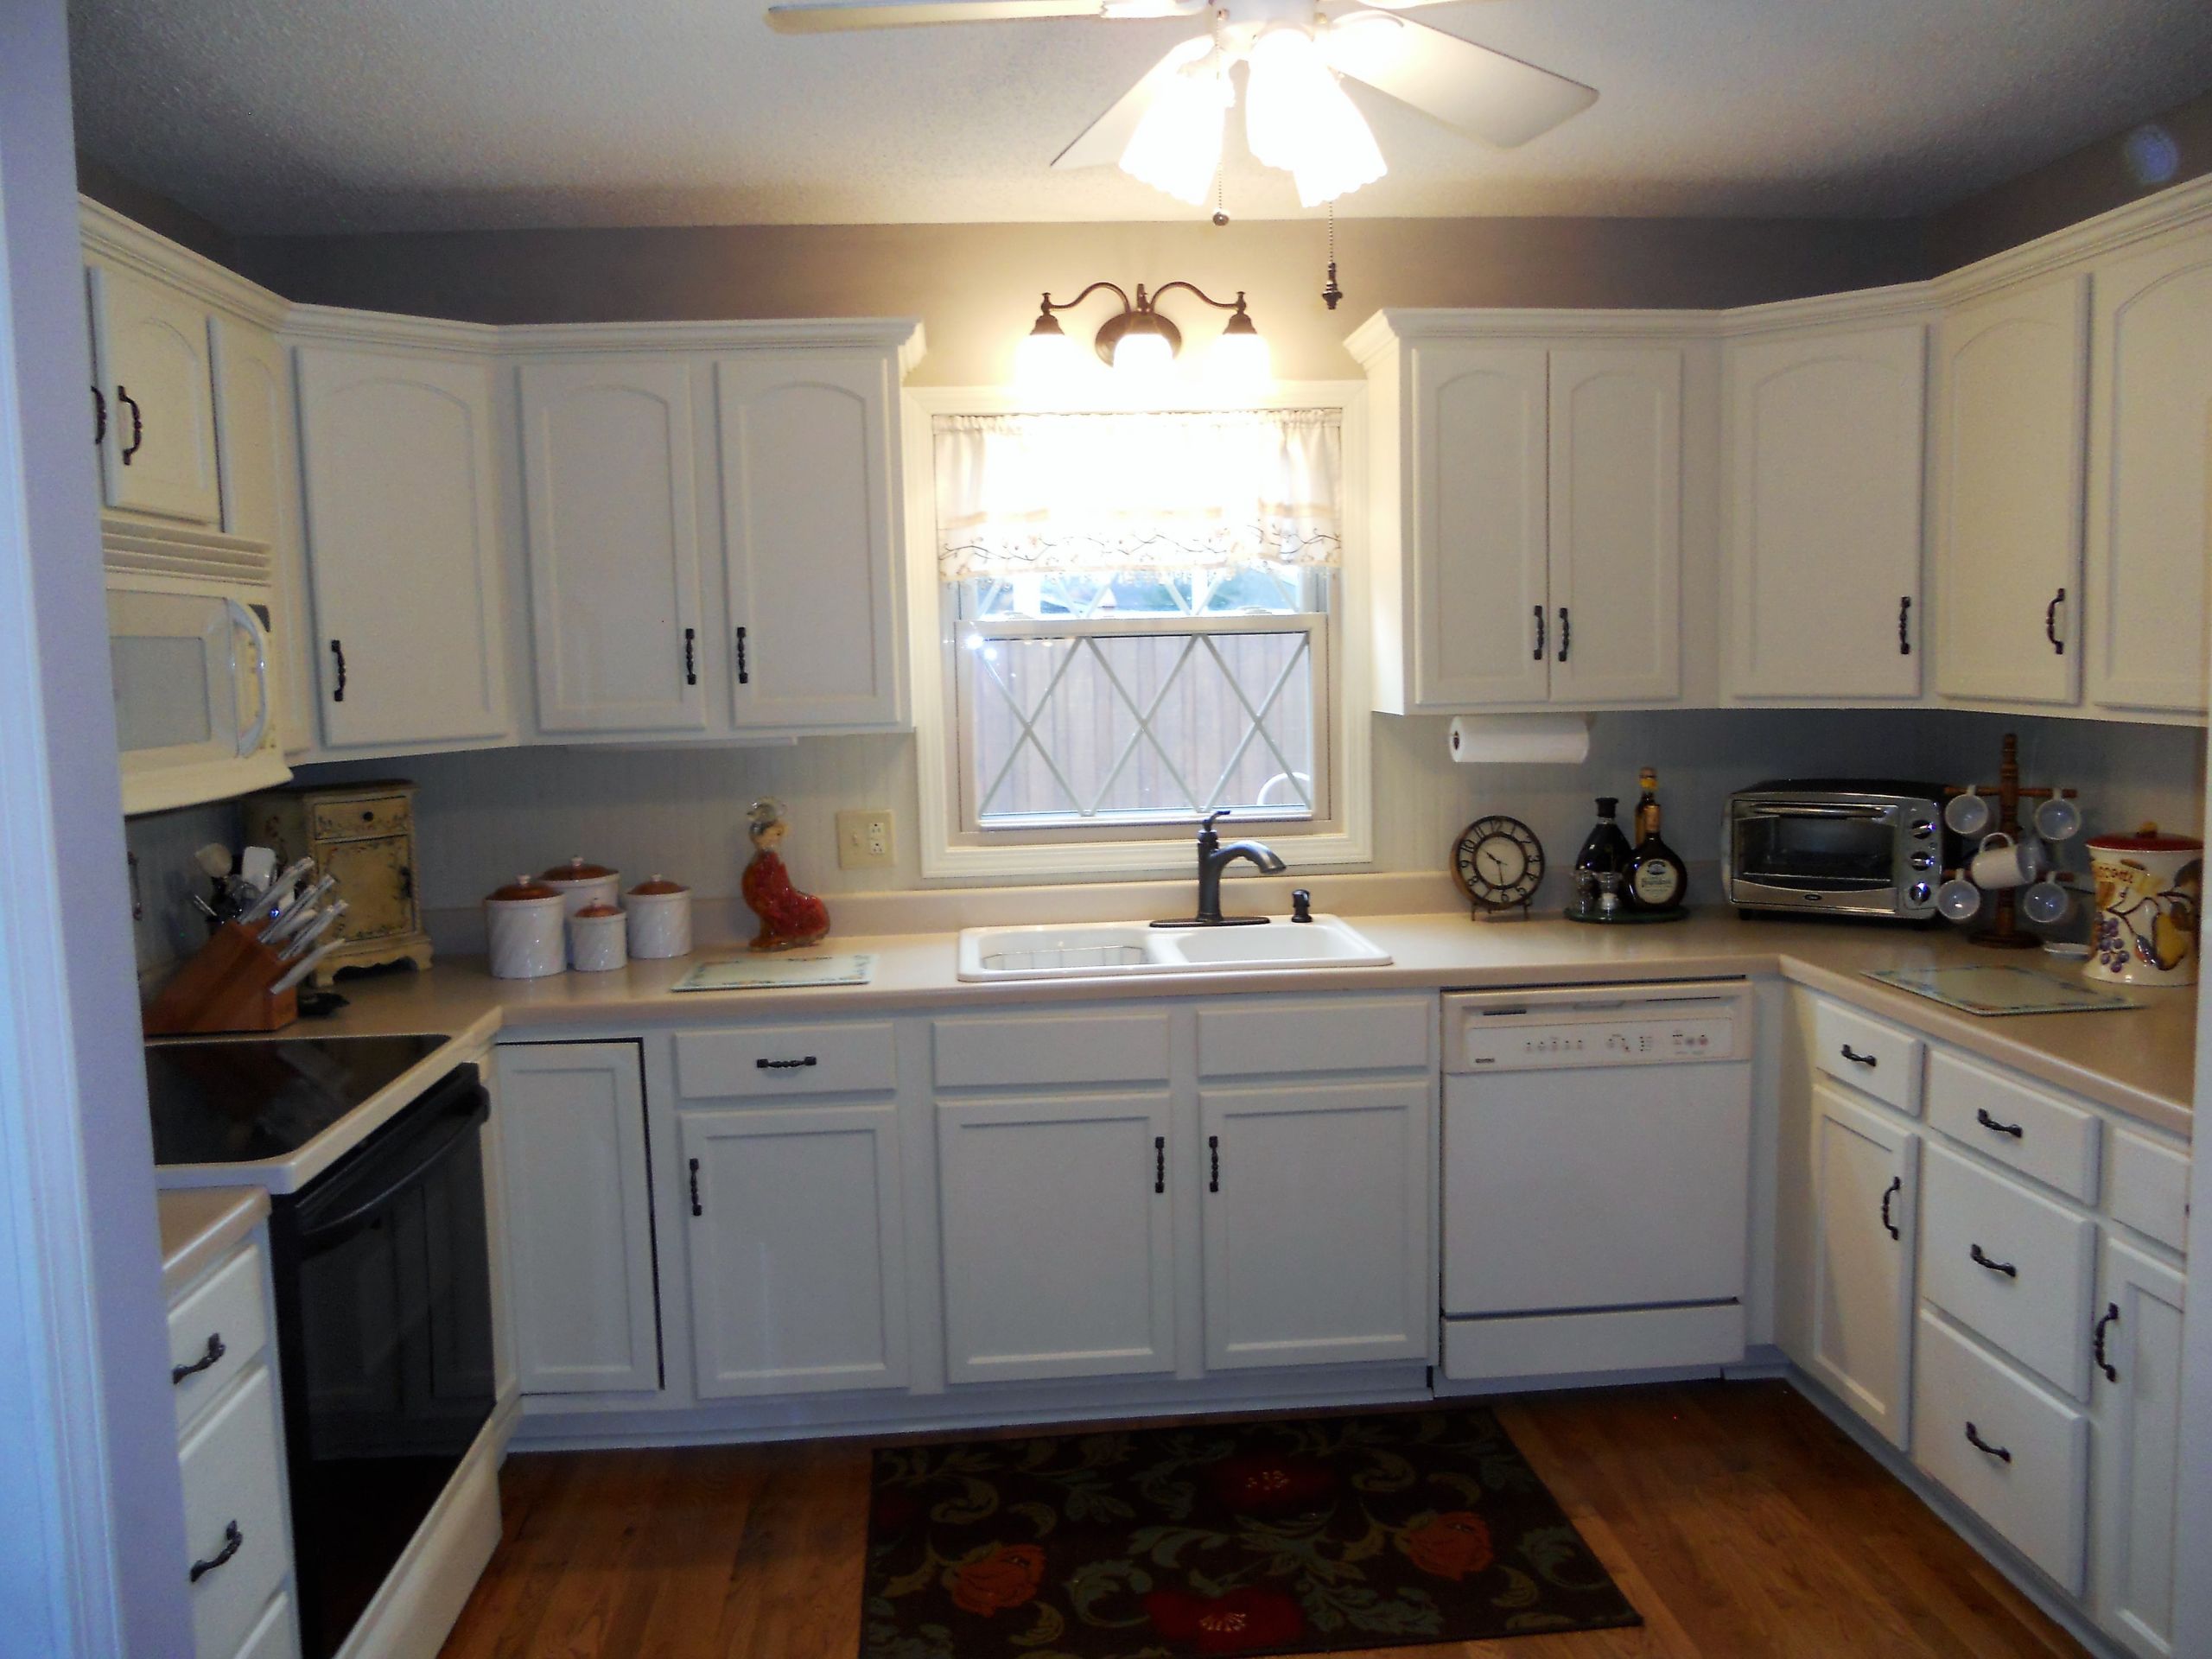 Kitchen Cabinet Paint White
 Great Painting Kitchen Cabinets White Before And After